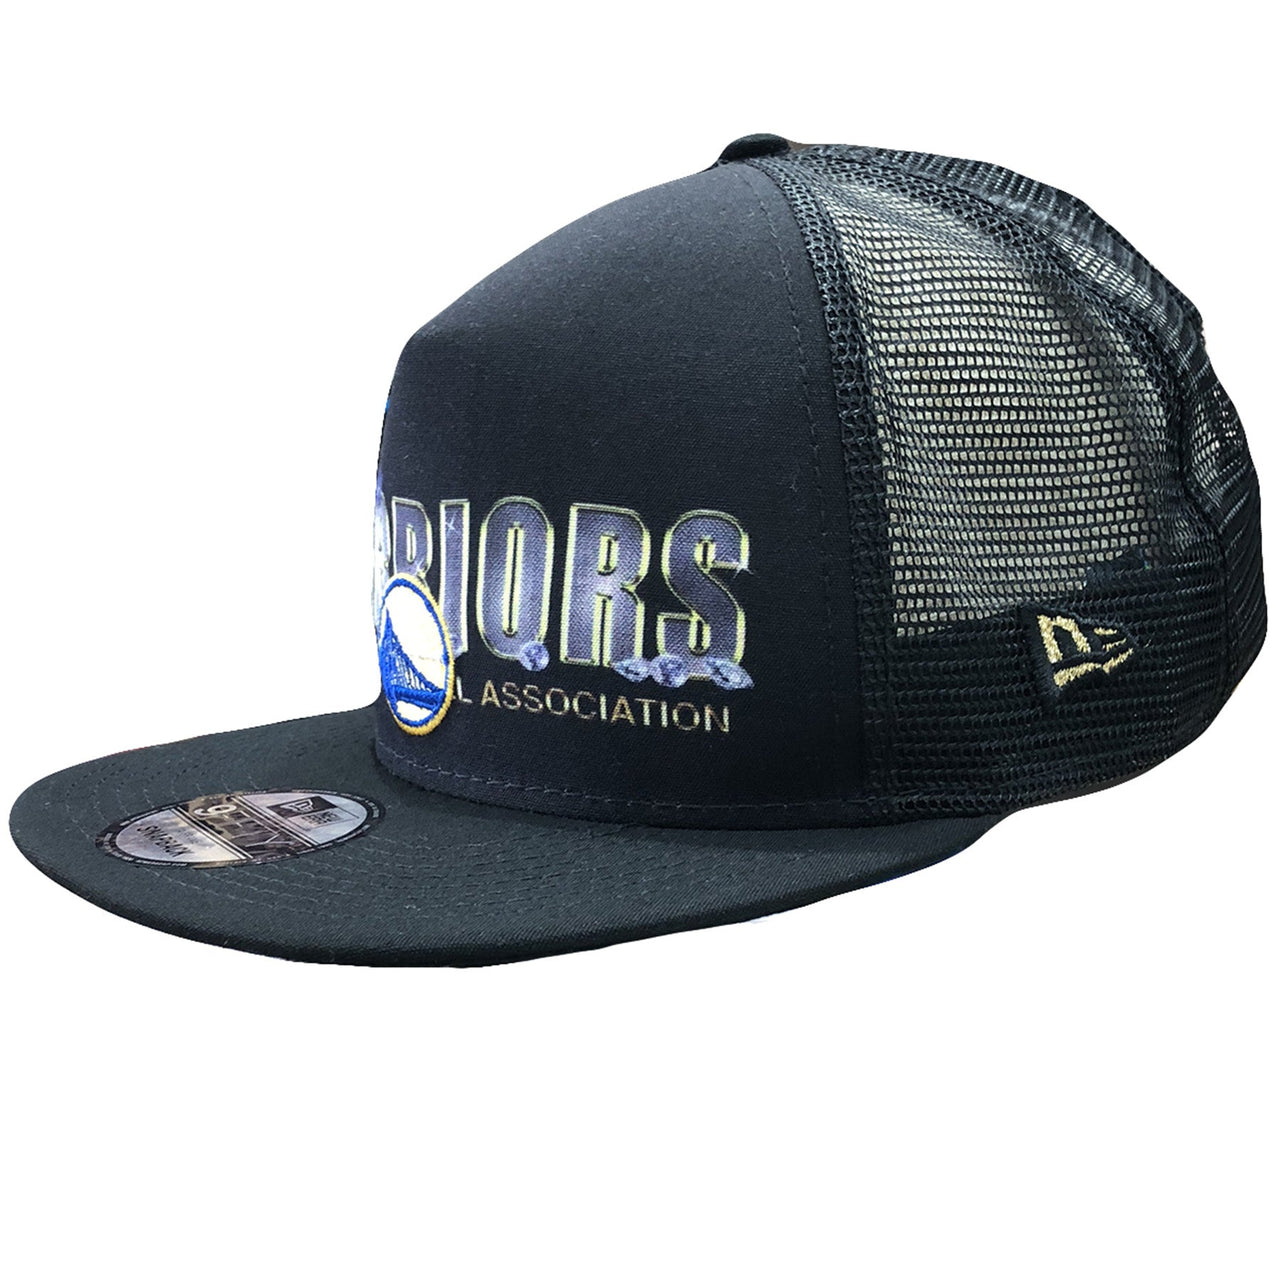 Embroidered on the left side of the Golden State Warriors trucker snapback hat is the New Era logo embroidered in gold